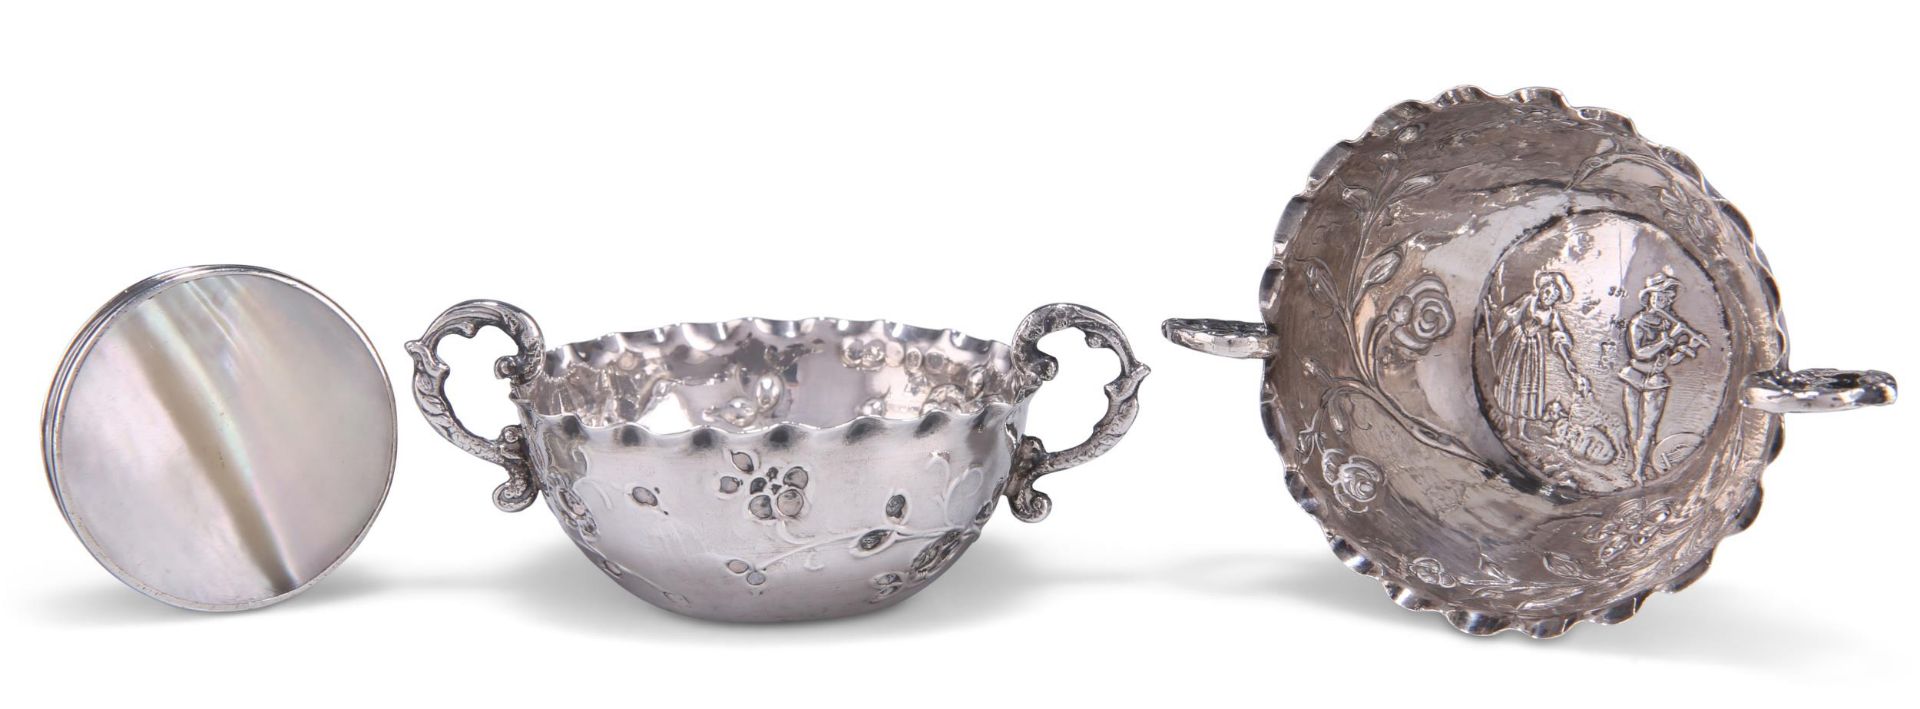 A PAIR OF SMALL SILVER TWO-HANDLED BOWLS, AND A MOTHER-OF-PEARL SNUFF BOX